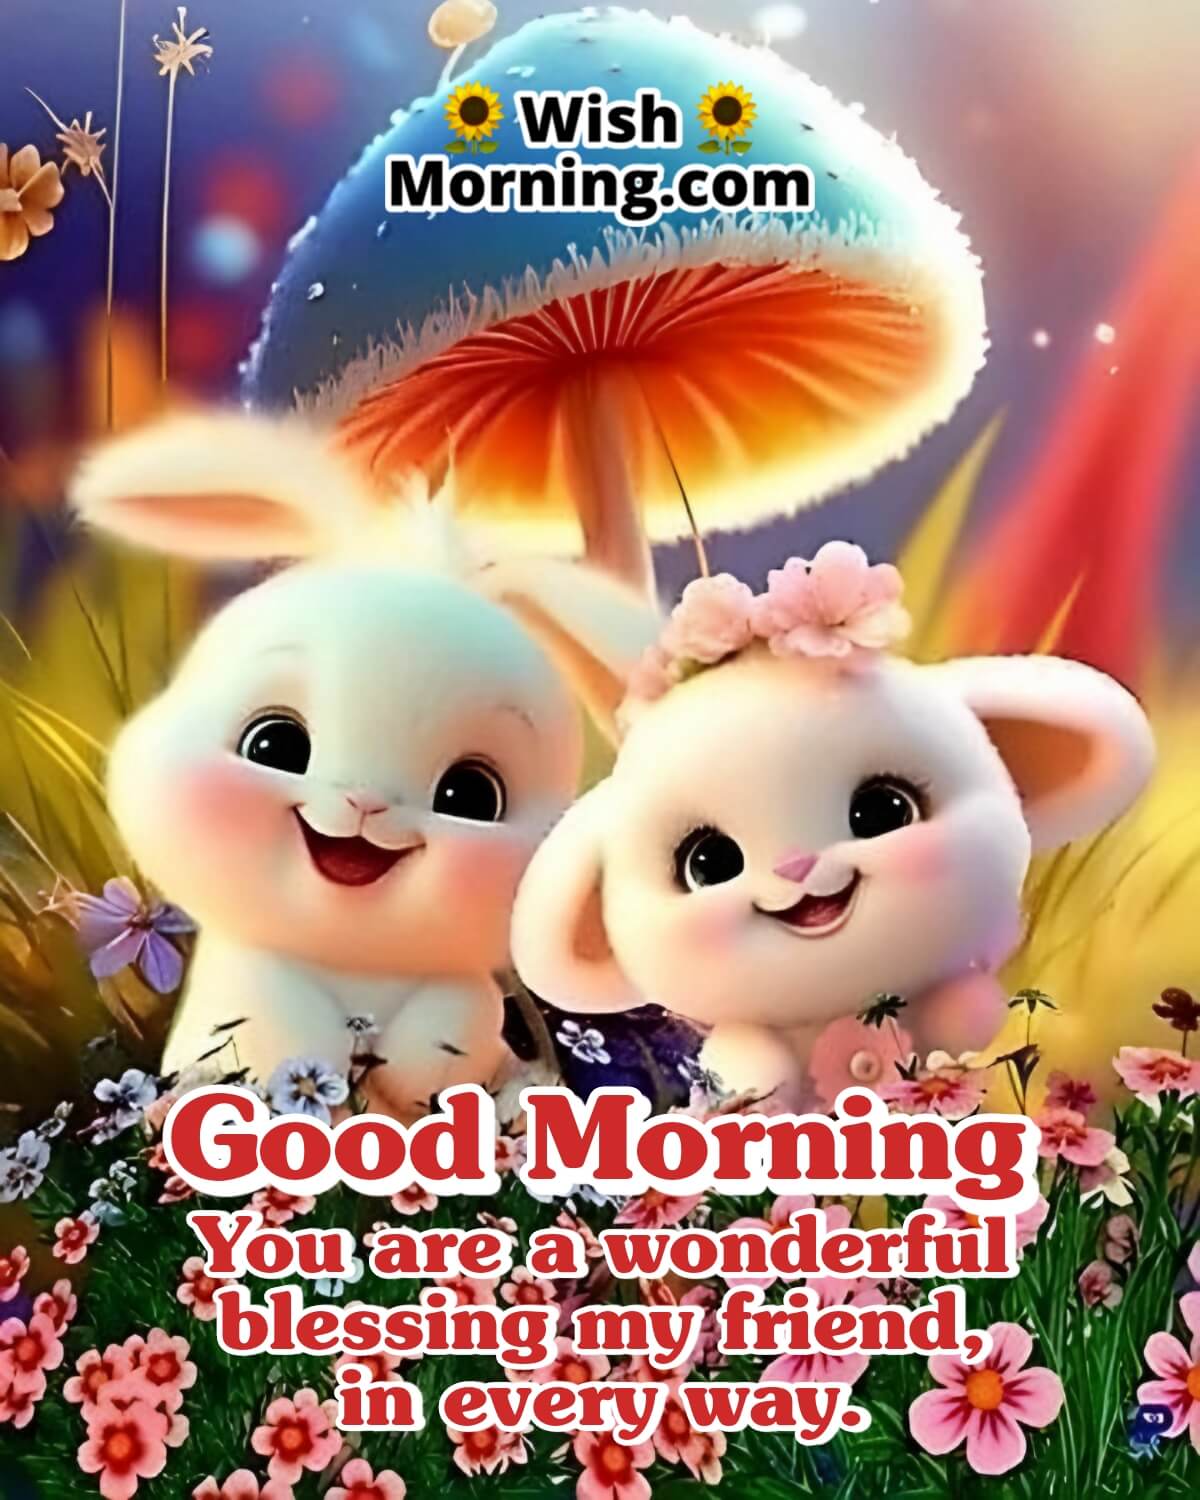 Good Morning Wonderful Blessing To Friend